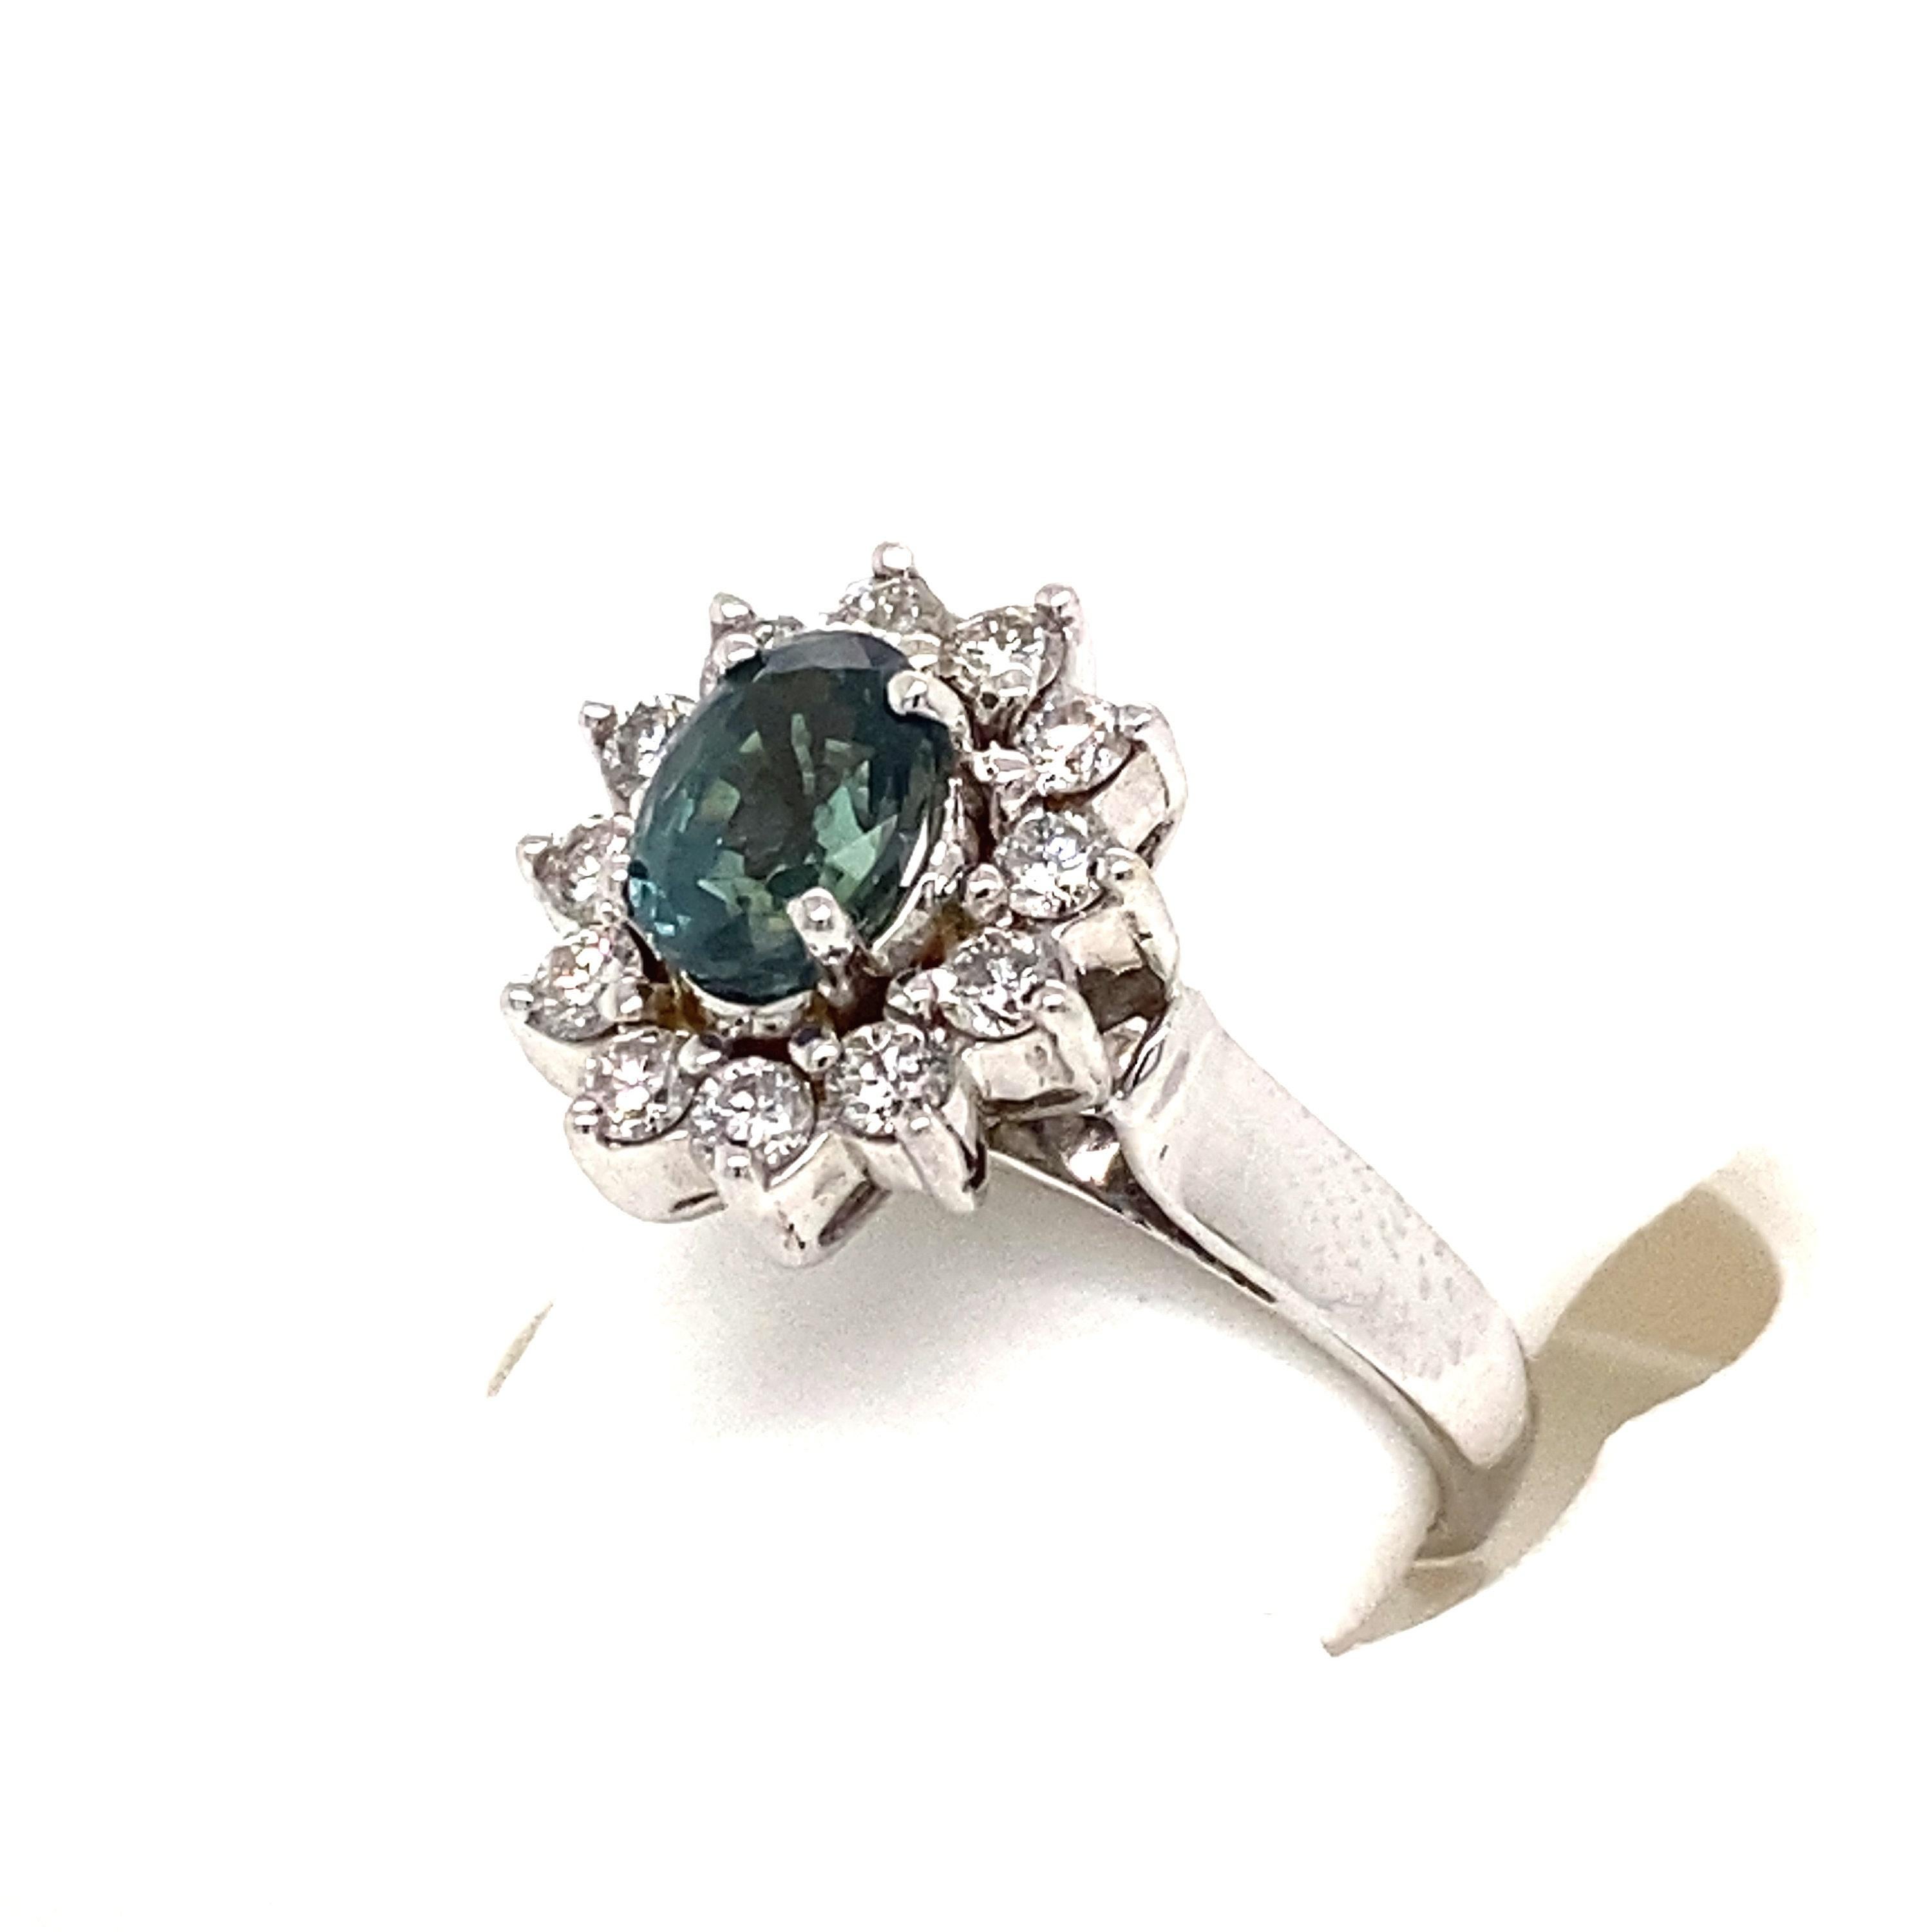 This is a gorgeous natural AAA quality oval Alexandrite surrounded by dainty diamonds that is set in a vintage white gold setting. This ring features a natural 1.25 carat oval alexandrite that is certified by the Gemological Institute of America